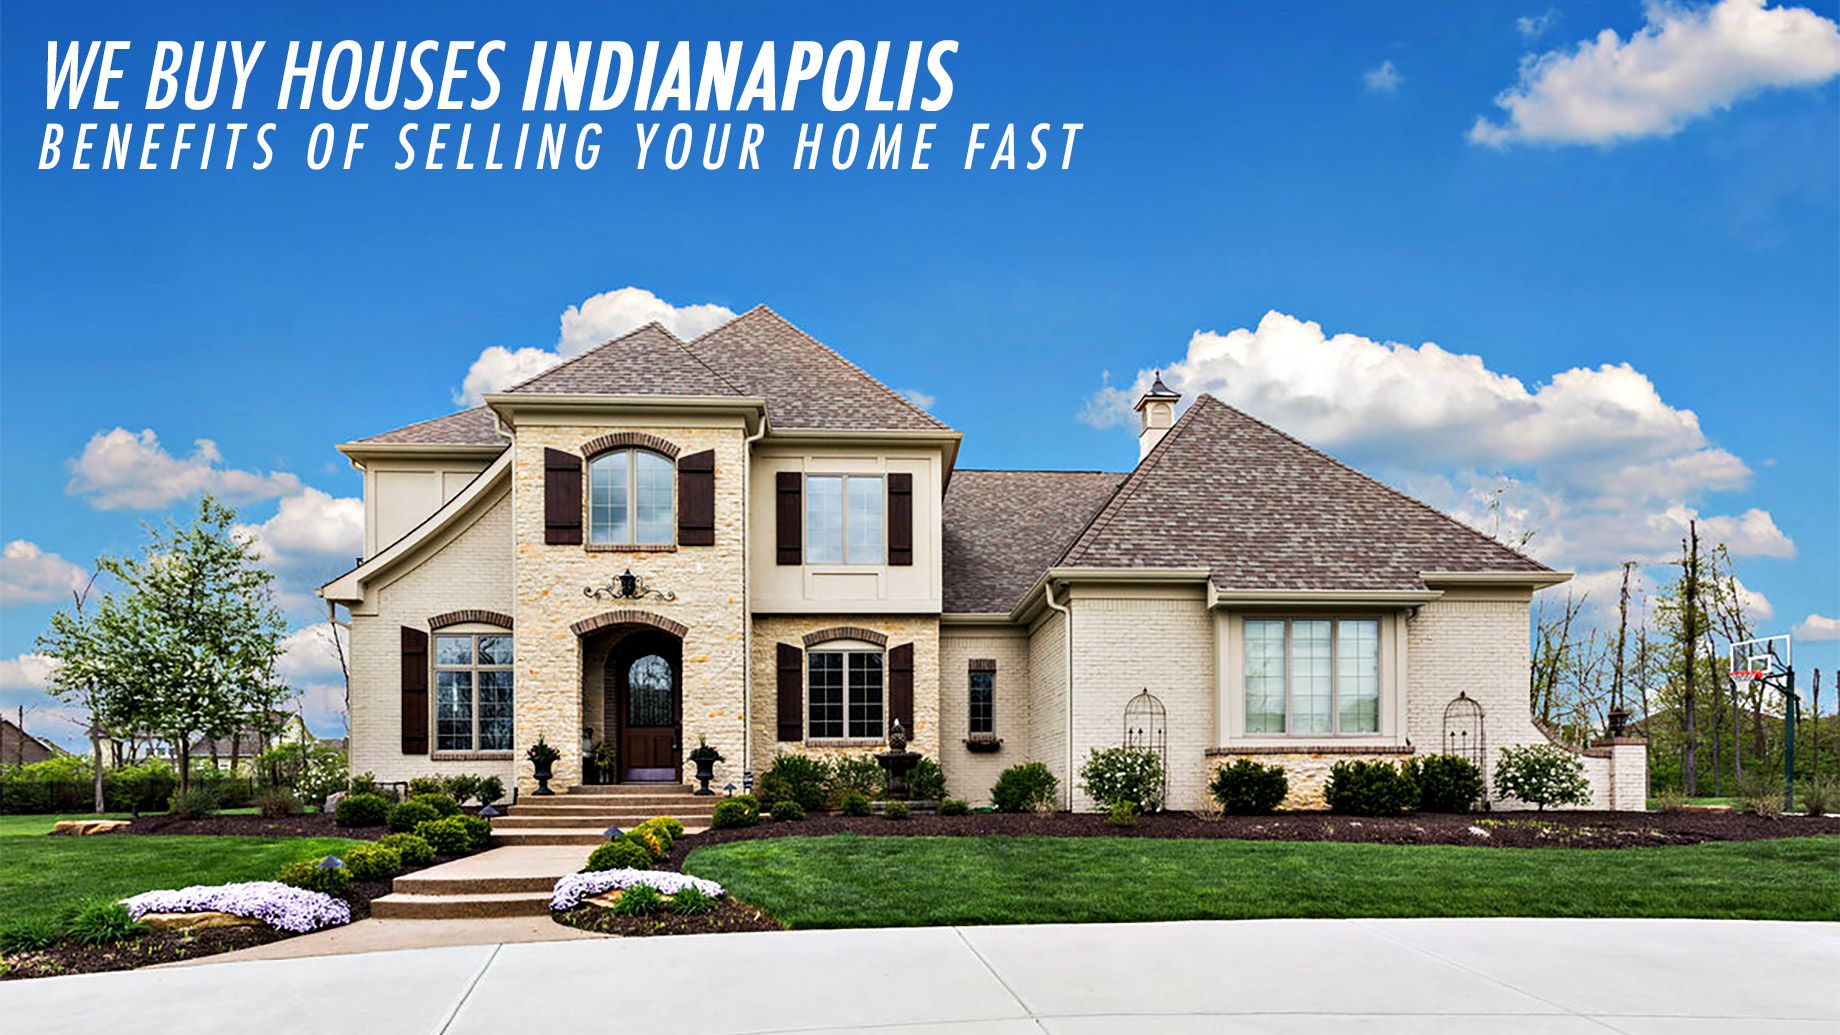 We Buy Houses Indianapolis - Benefits of Selling Your Home Fast